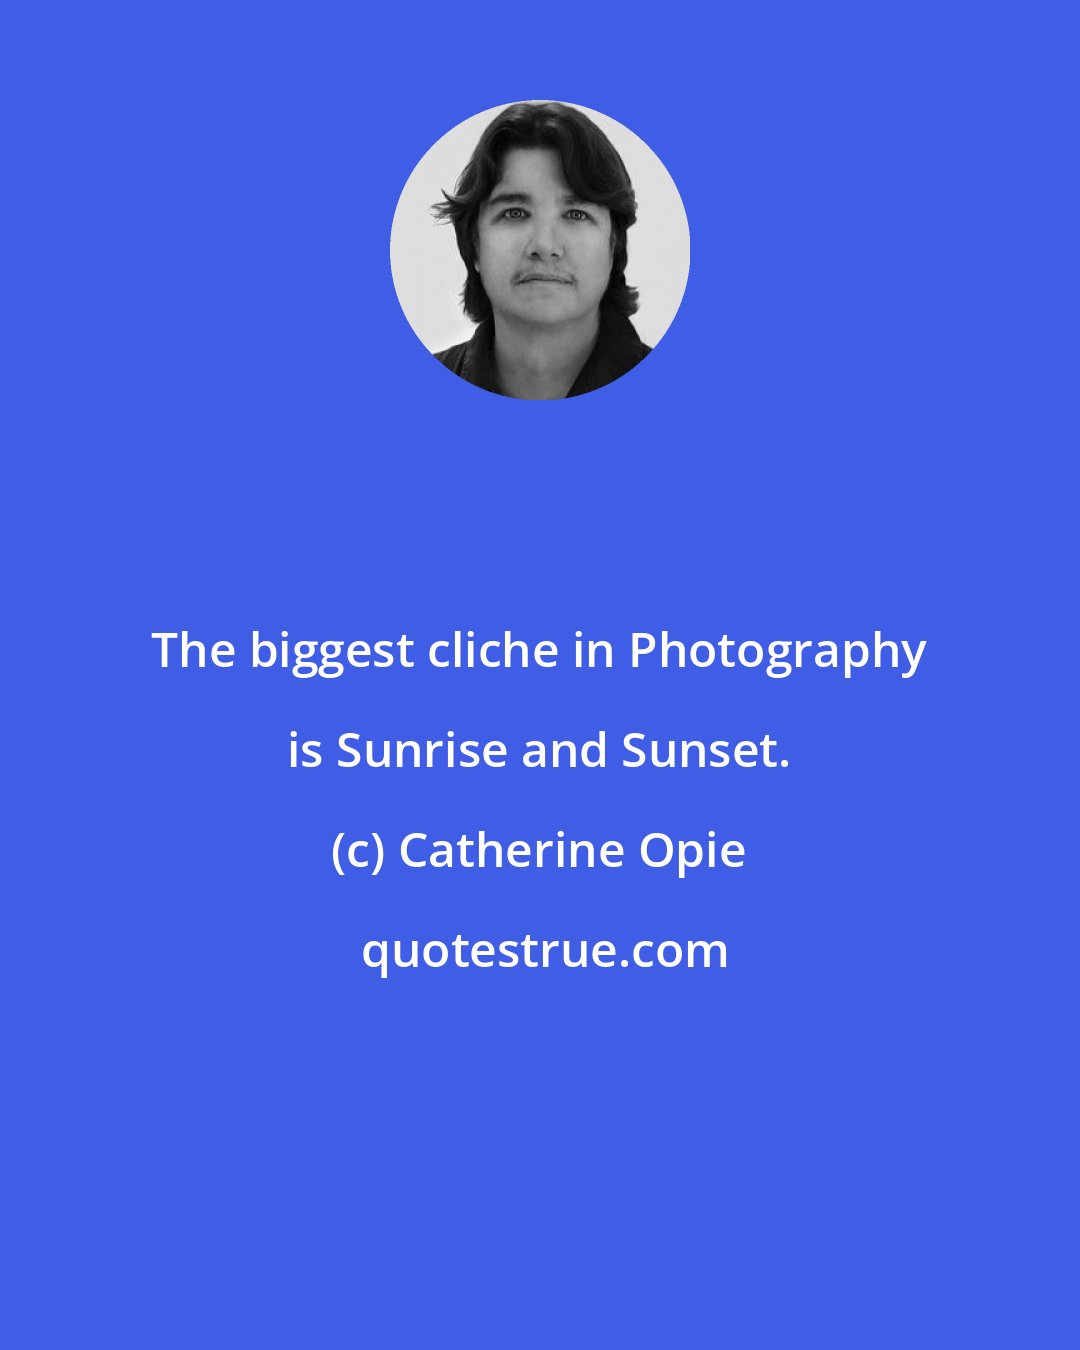 Catherine Opie: The biggest cliche in Photography is Sunrise and Sunset.